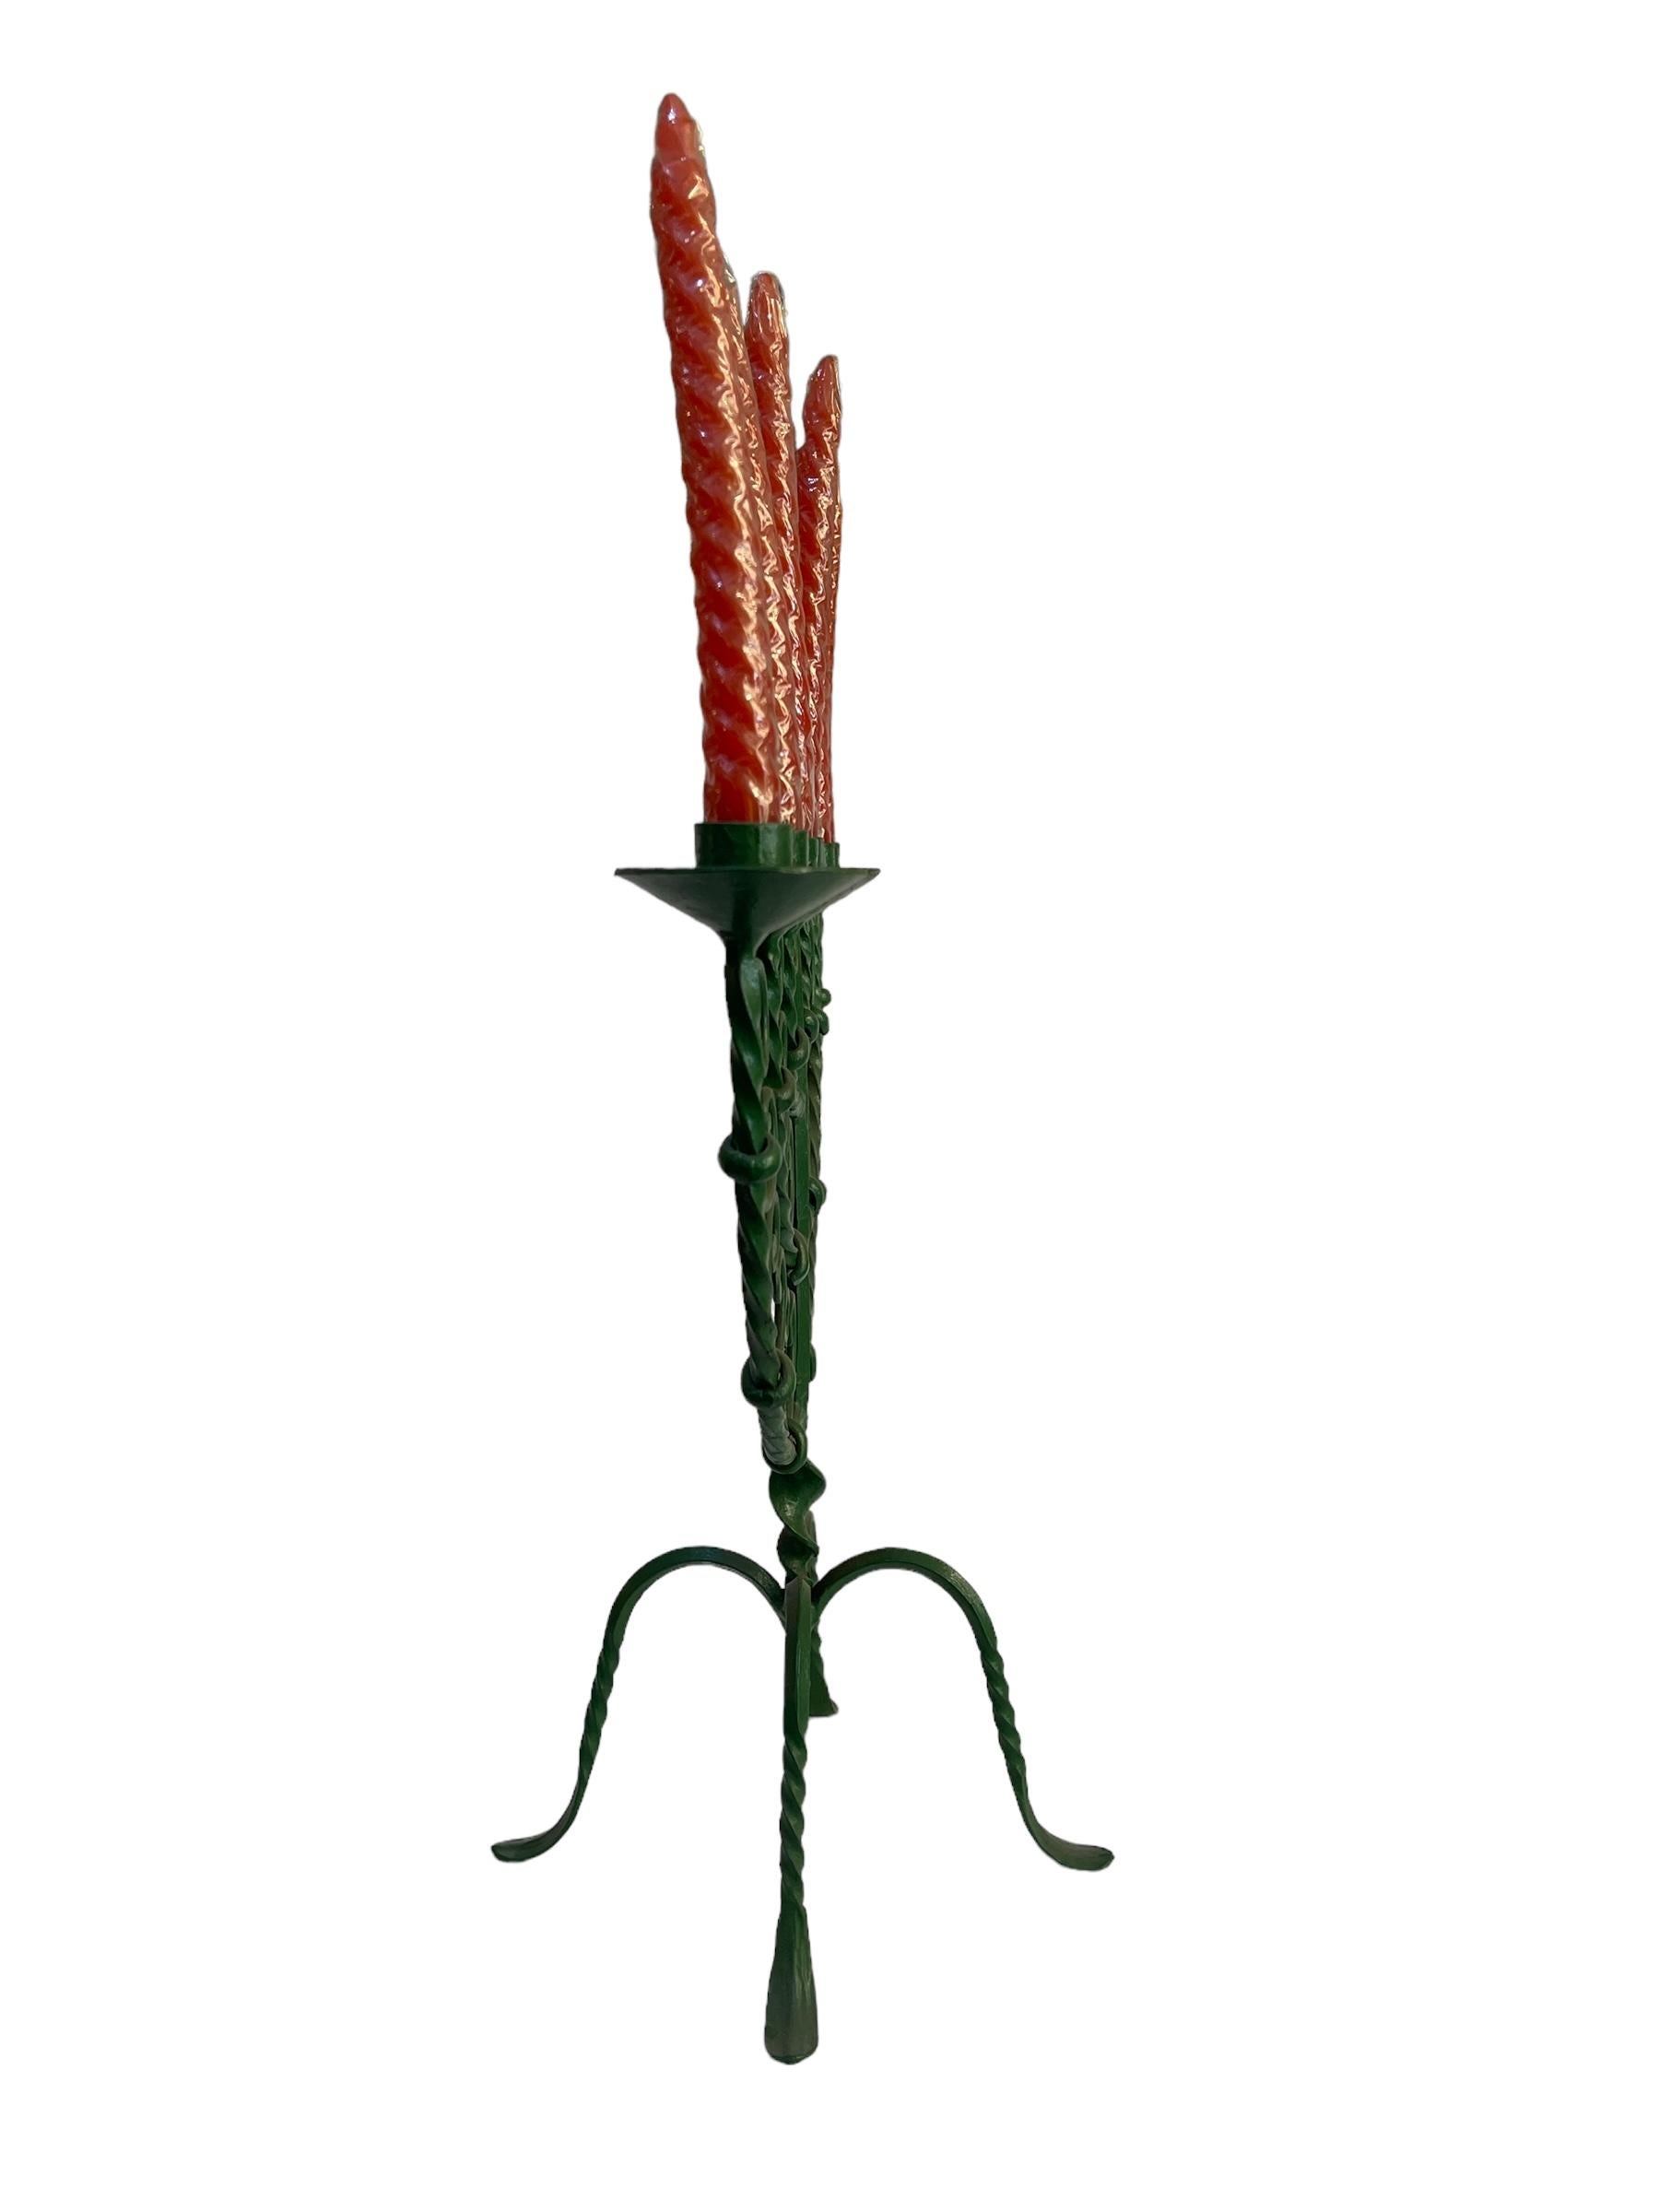 Seven-armed Jewish candelabra, wrought iron
Elegant seven-armed Jewish candelabra, made of green lacquered wrought iron.
Excellent condition, as shown in the photo
Dimensions: 48x26 cm, height (without candles) 42 cm